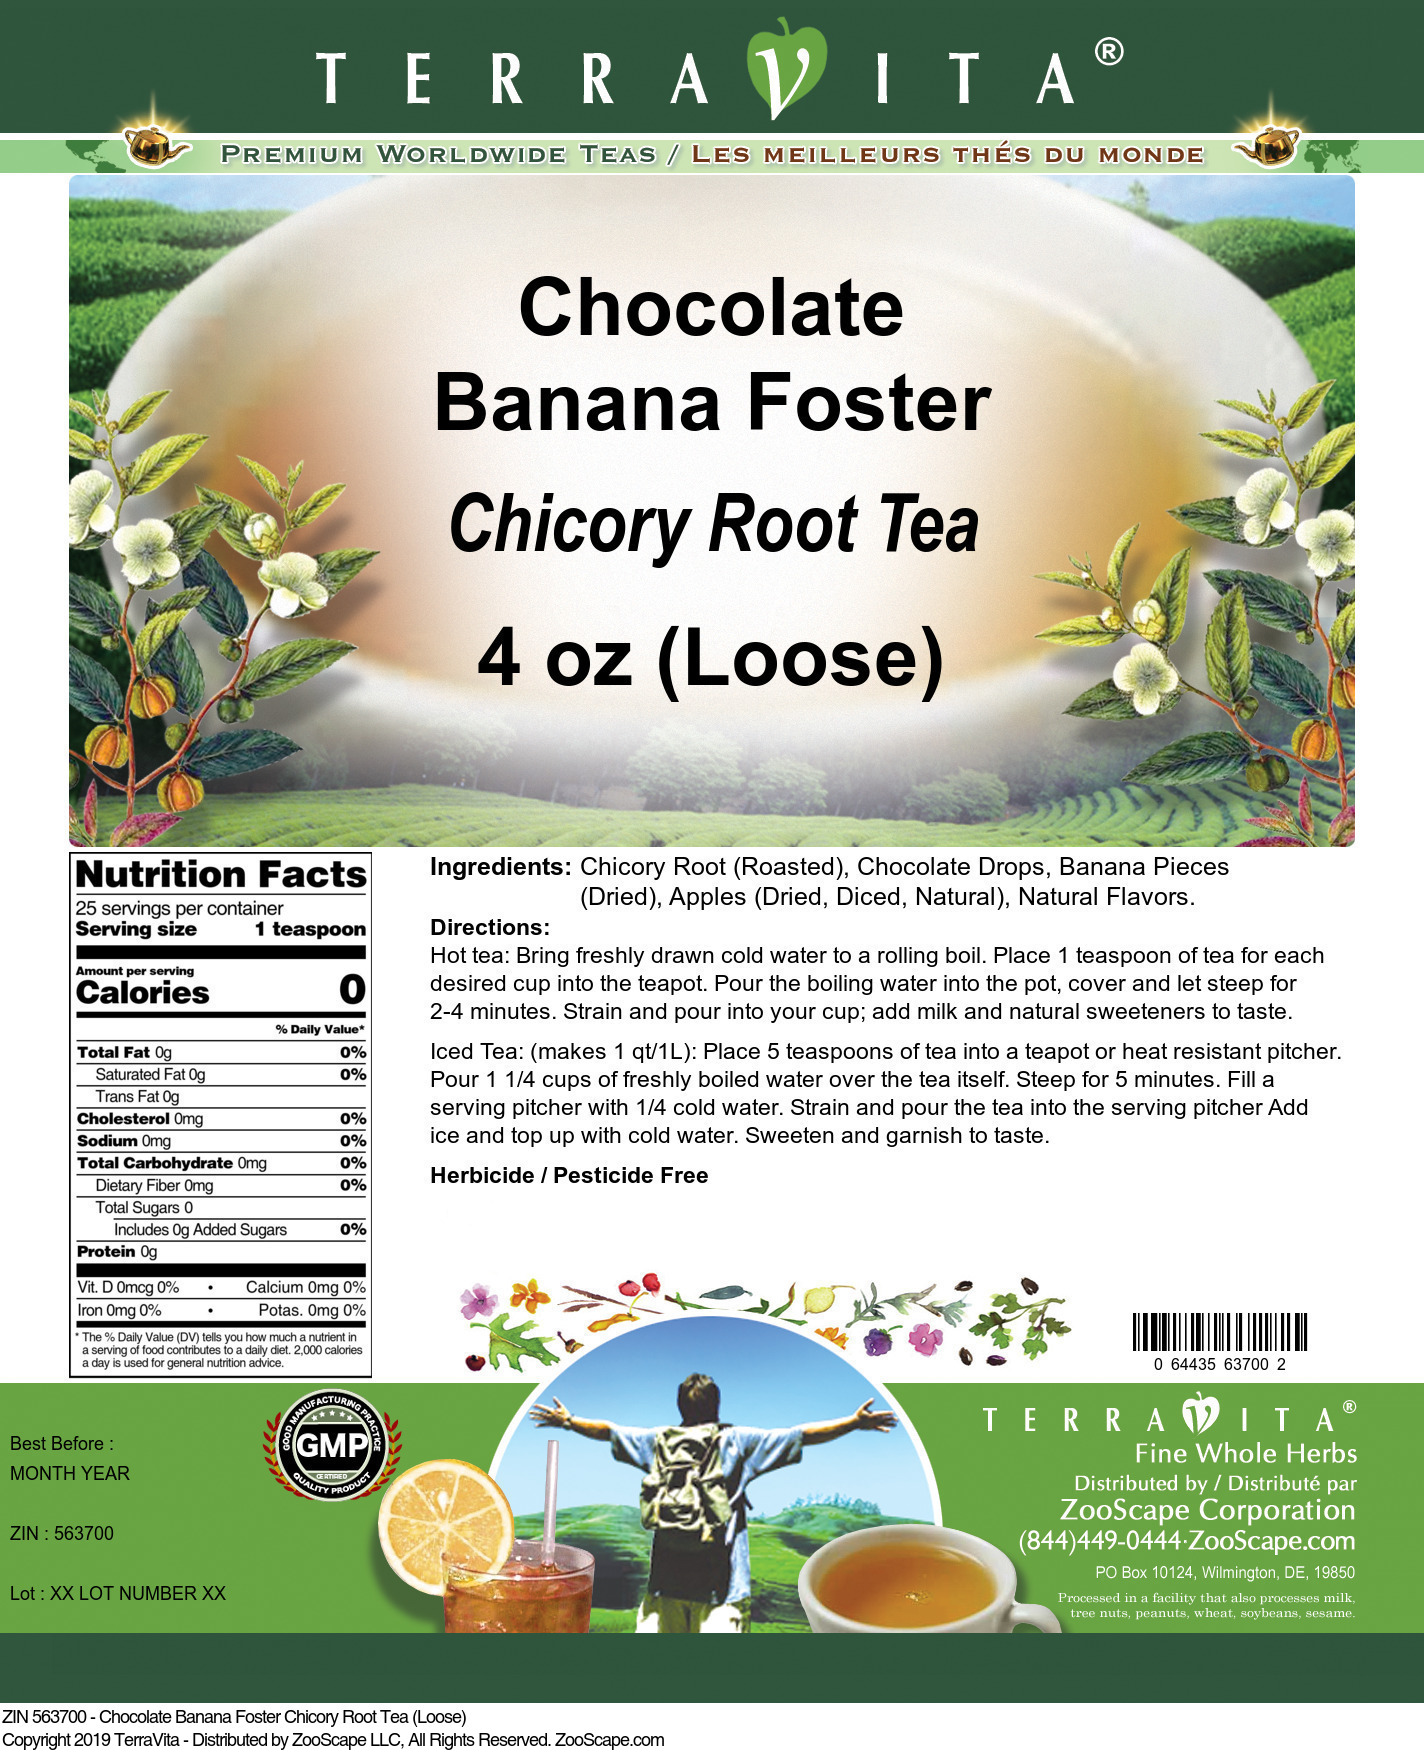 Chocolate Banana Foster Chicory Root Tea (Loose) - Label